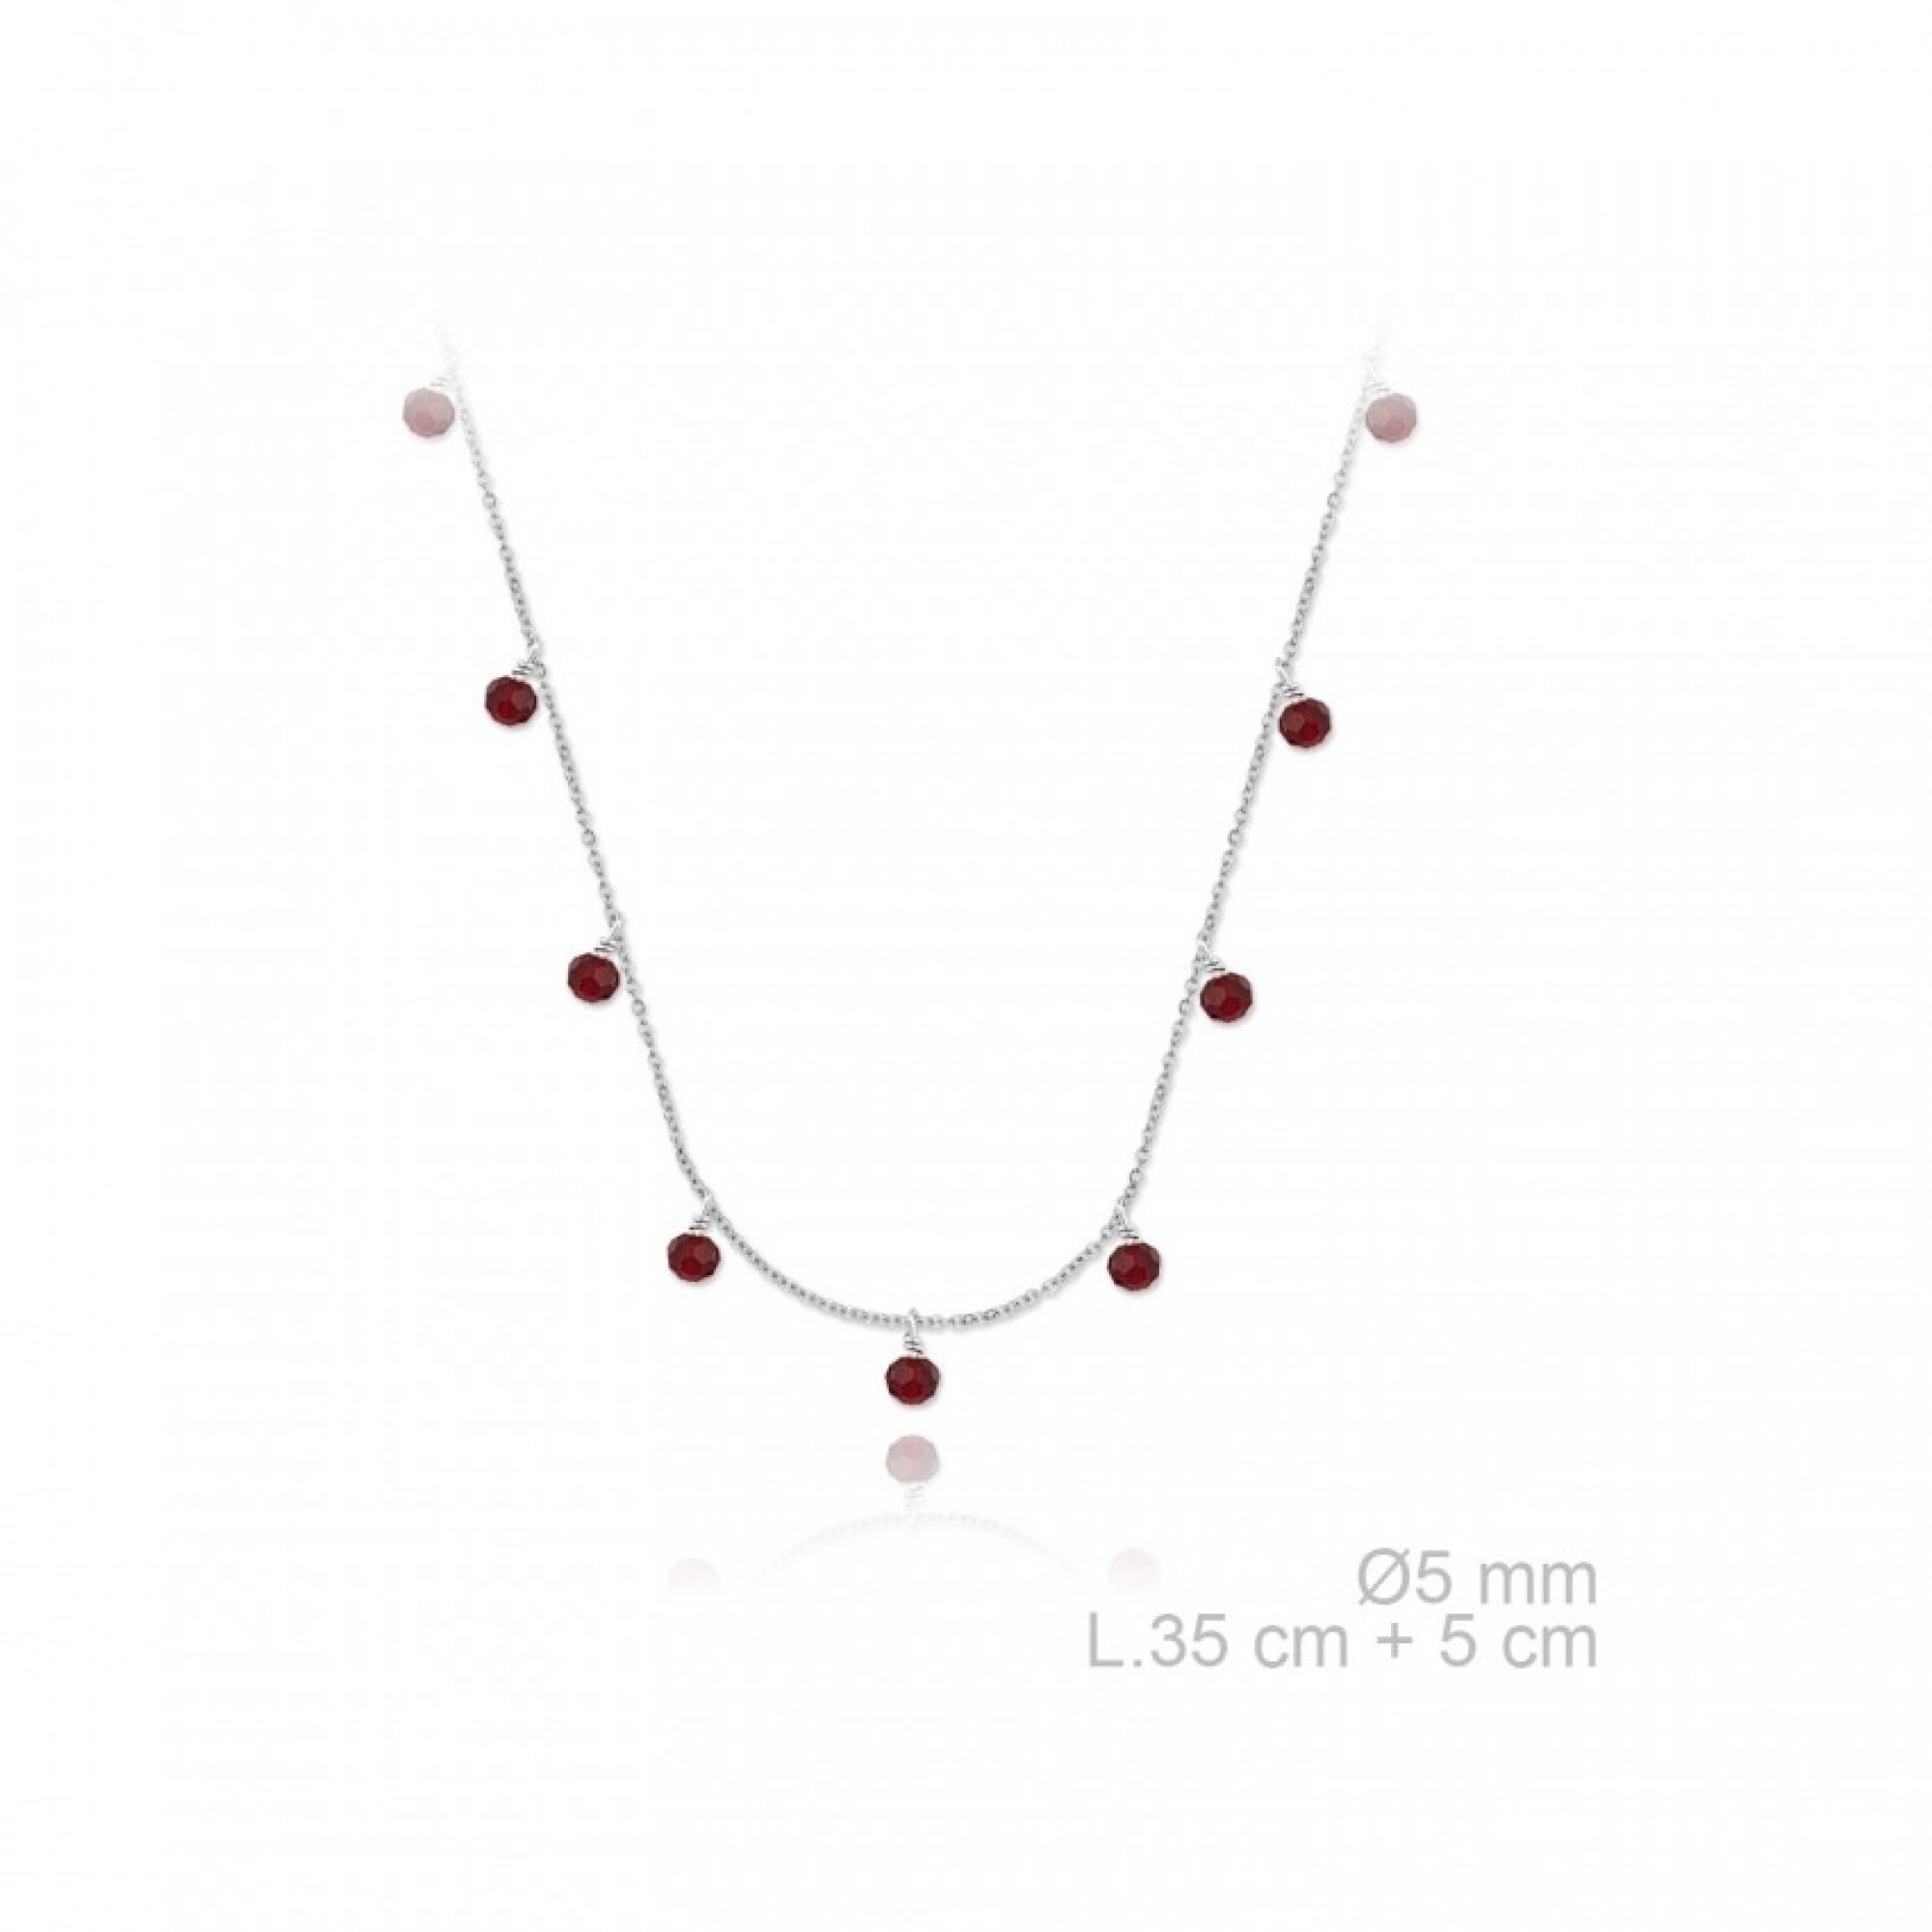 Silver dangle necklace with burgundy stones